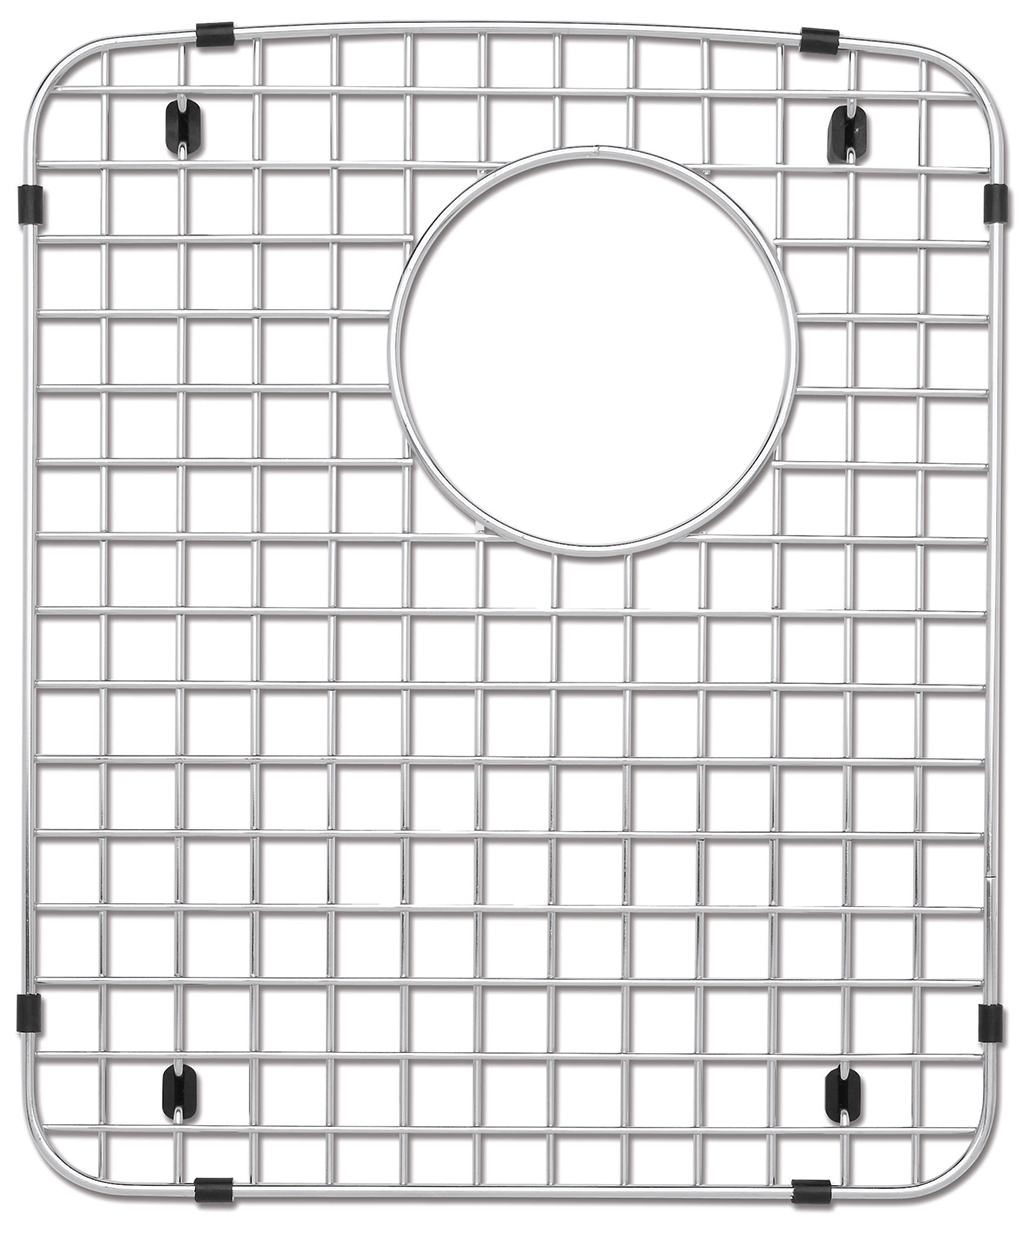 Blanco 221008 15-1/4" x 12-3/4" Stainless Steel Sink Grid (Diamond Double Left Bowl) - image 1 of 5